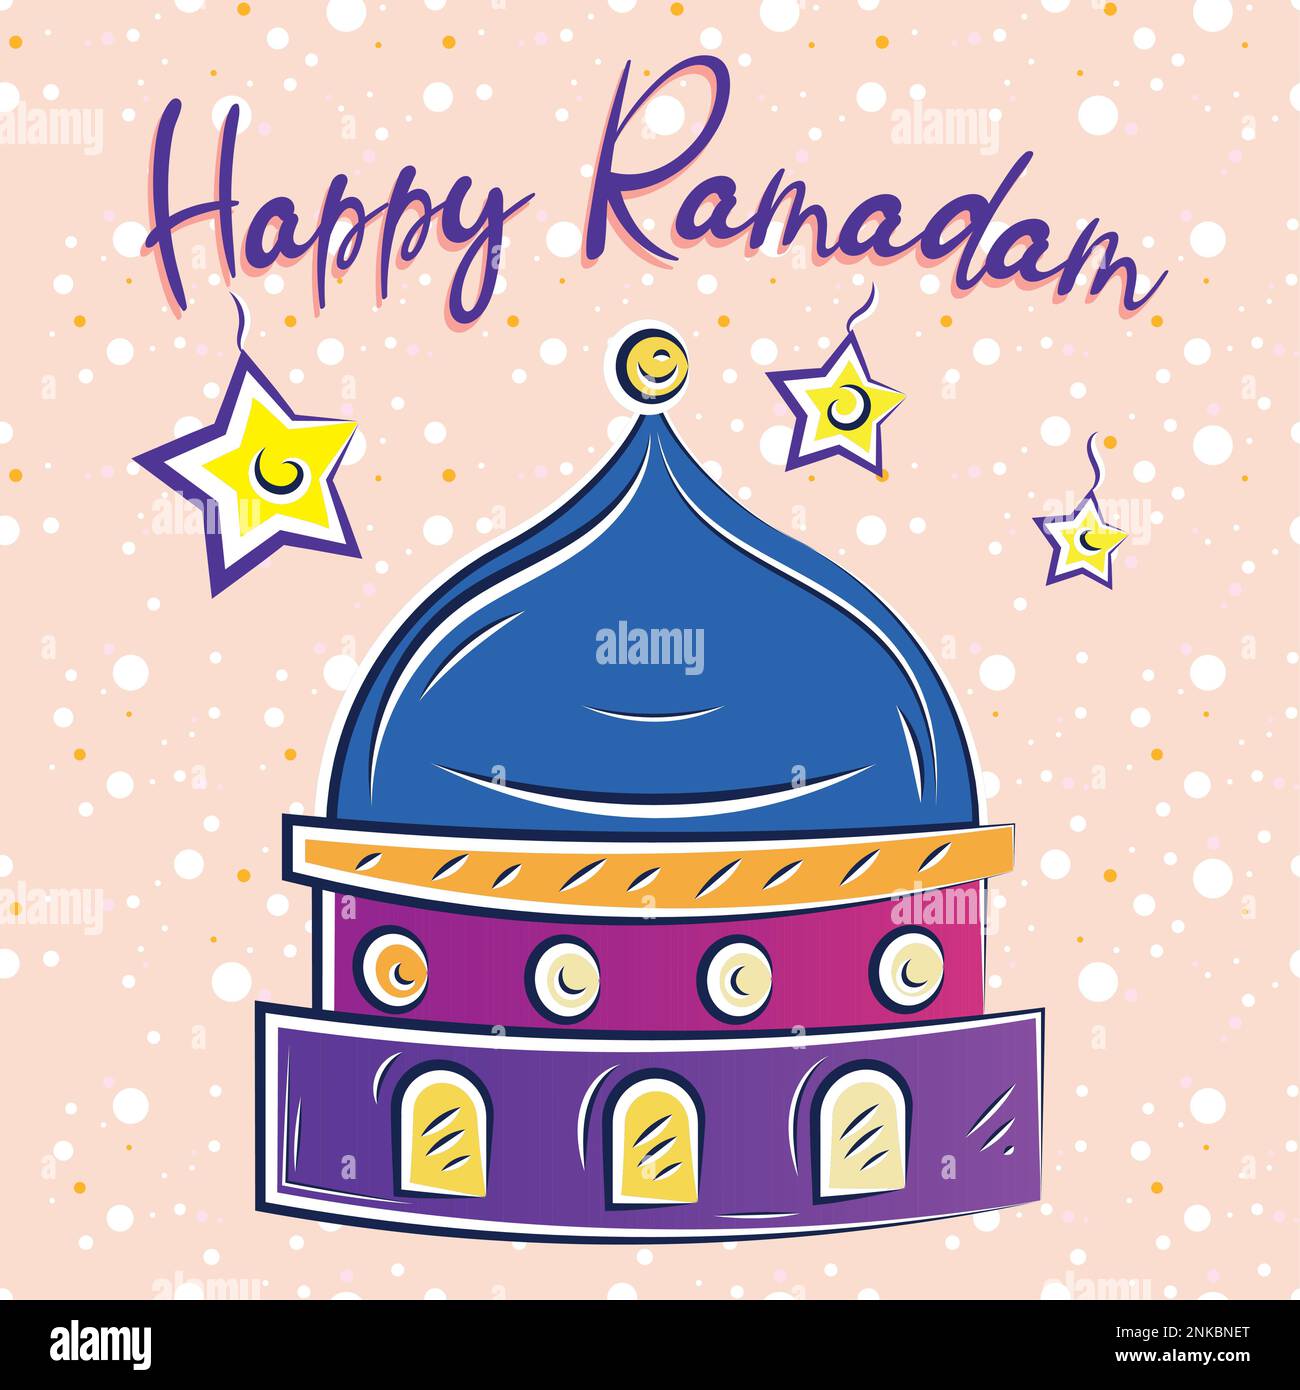 Happy ramadam kareem poster with stars and mosque sketch Vector Stock Vector